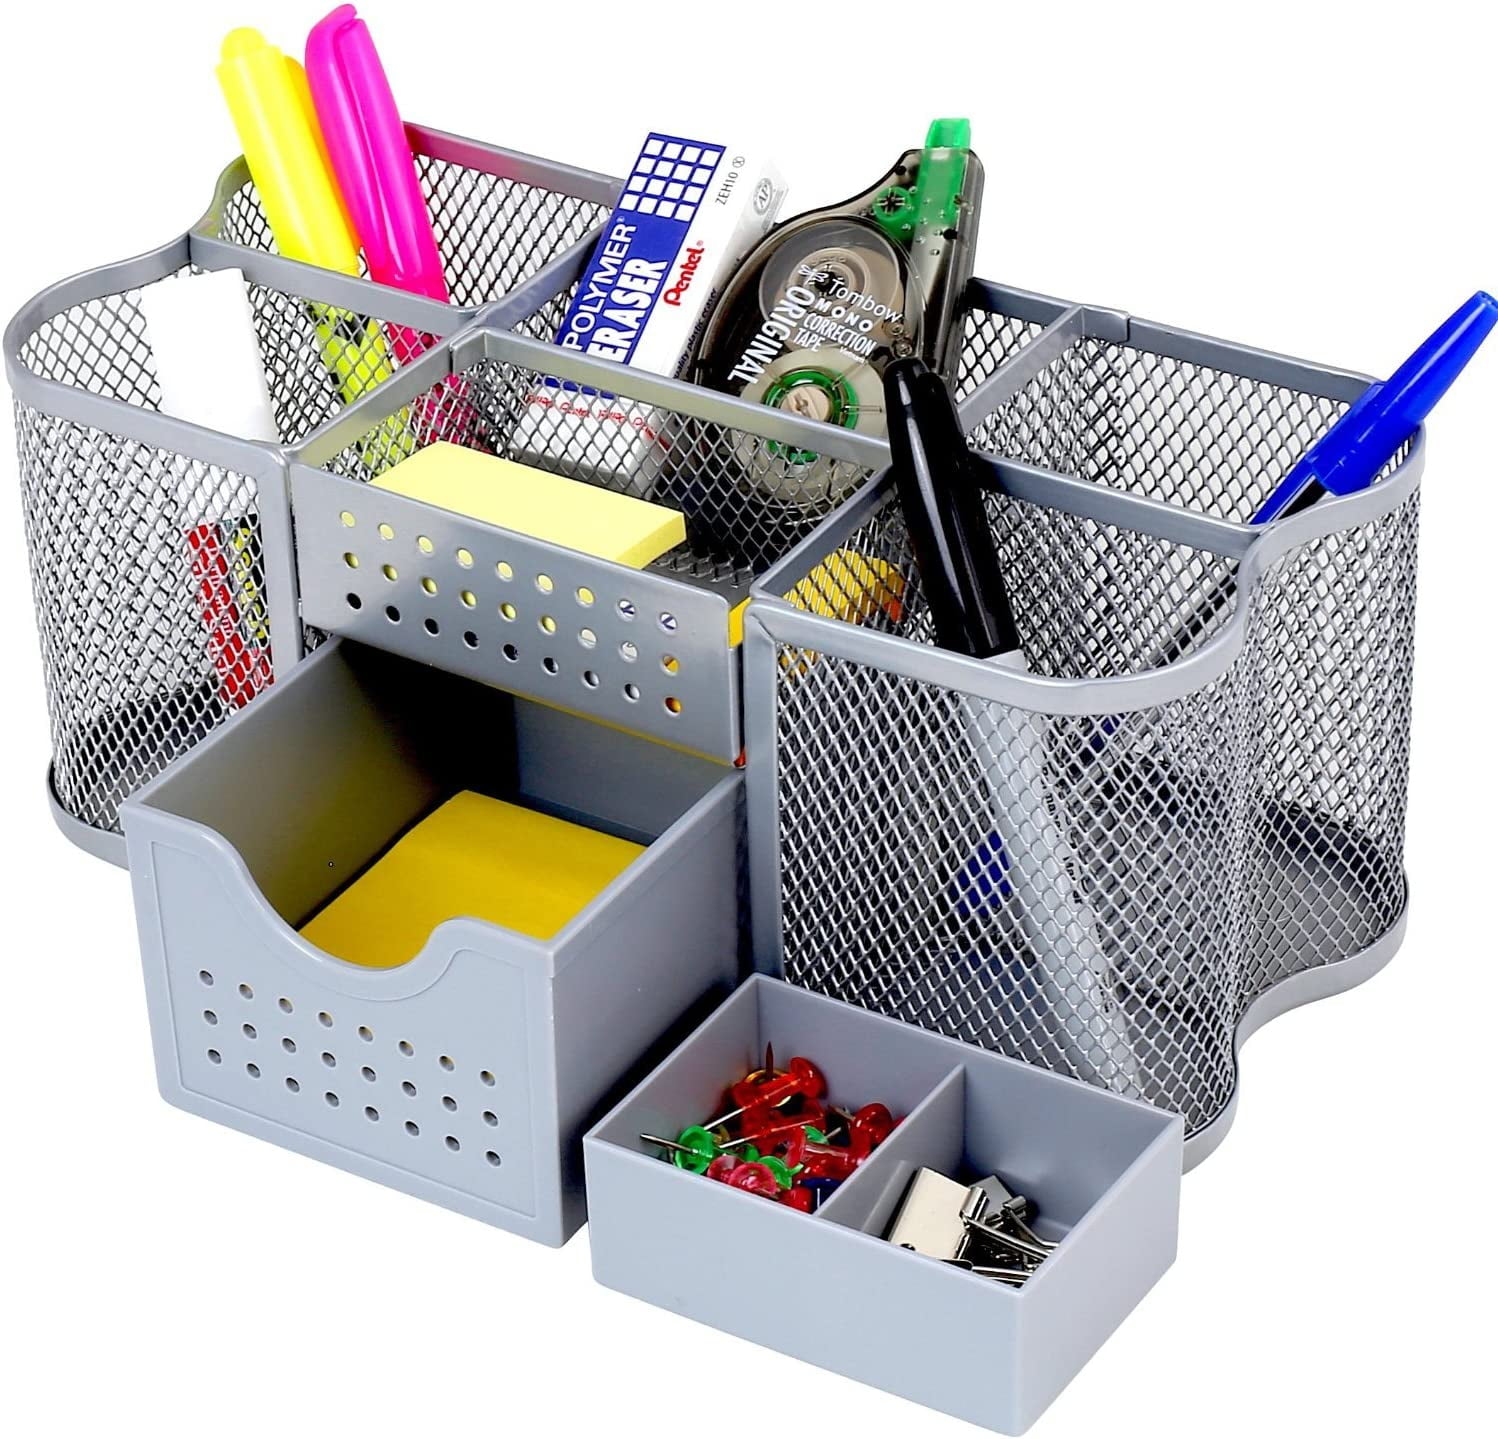 Pen+Gear Plastic Caddy, Craft and Hobby Organizer, Clear Tint